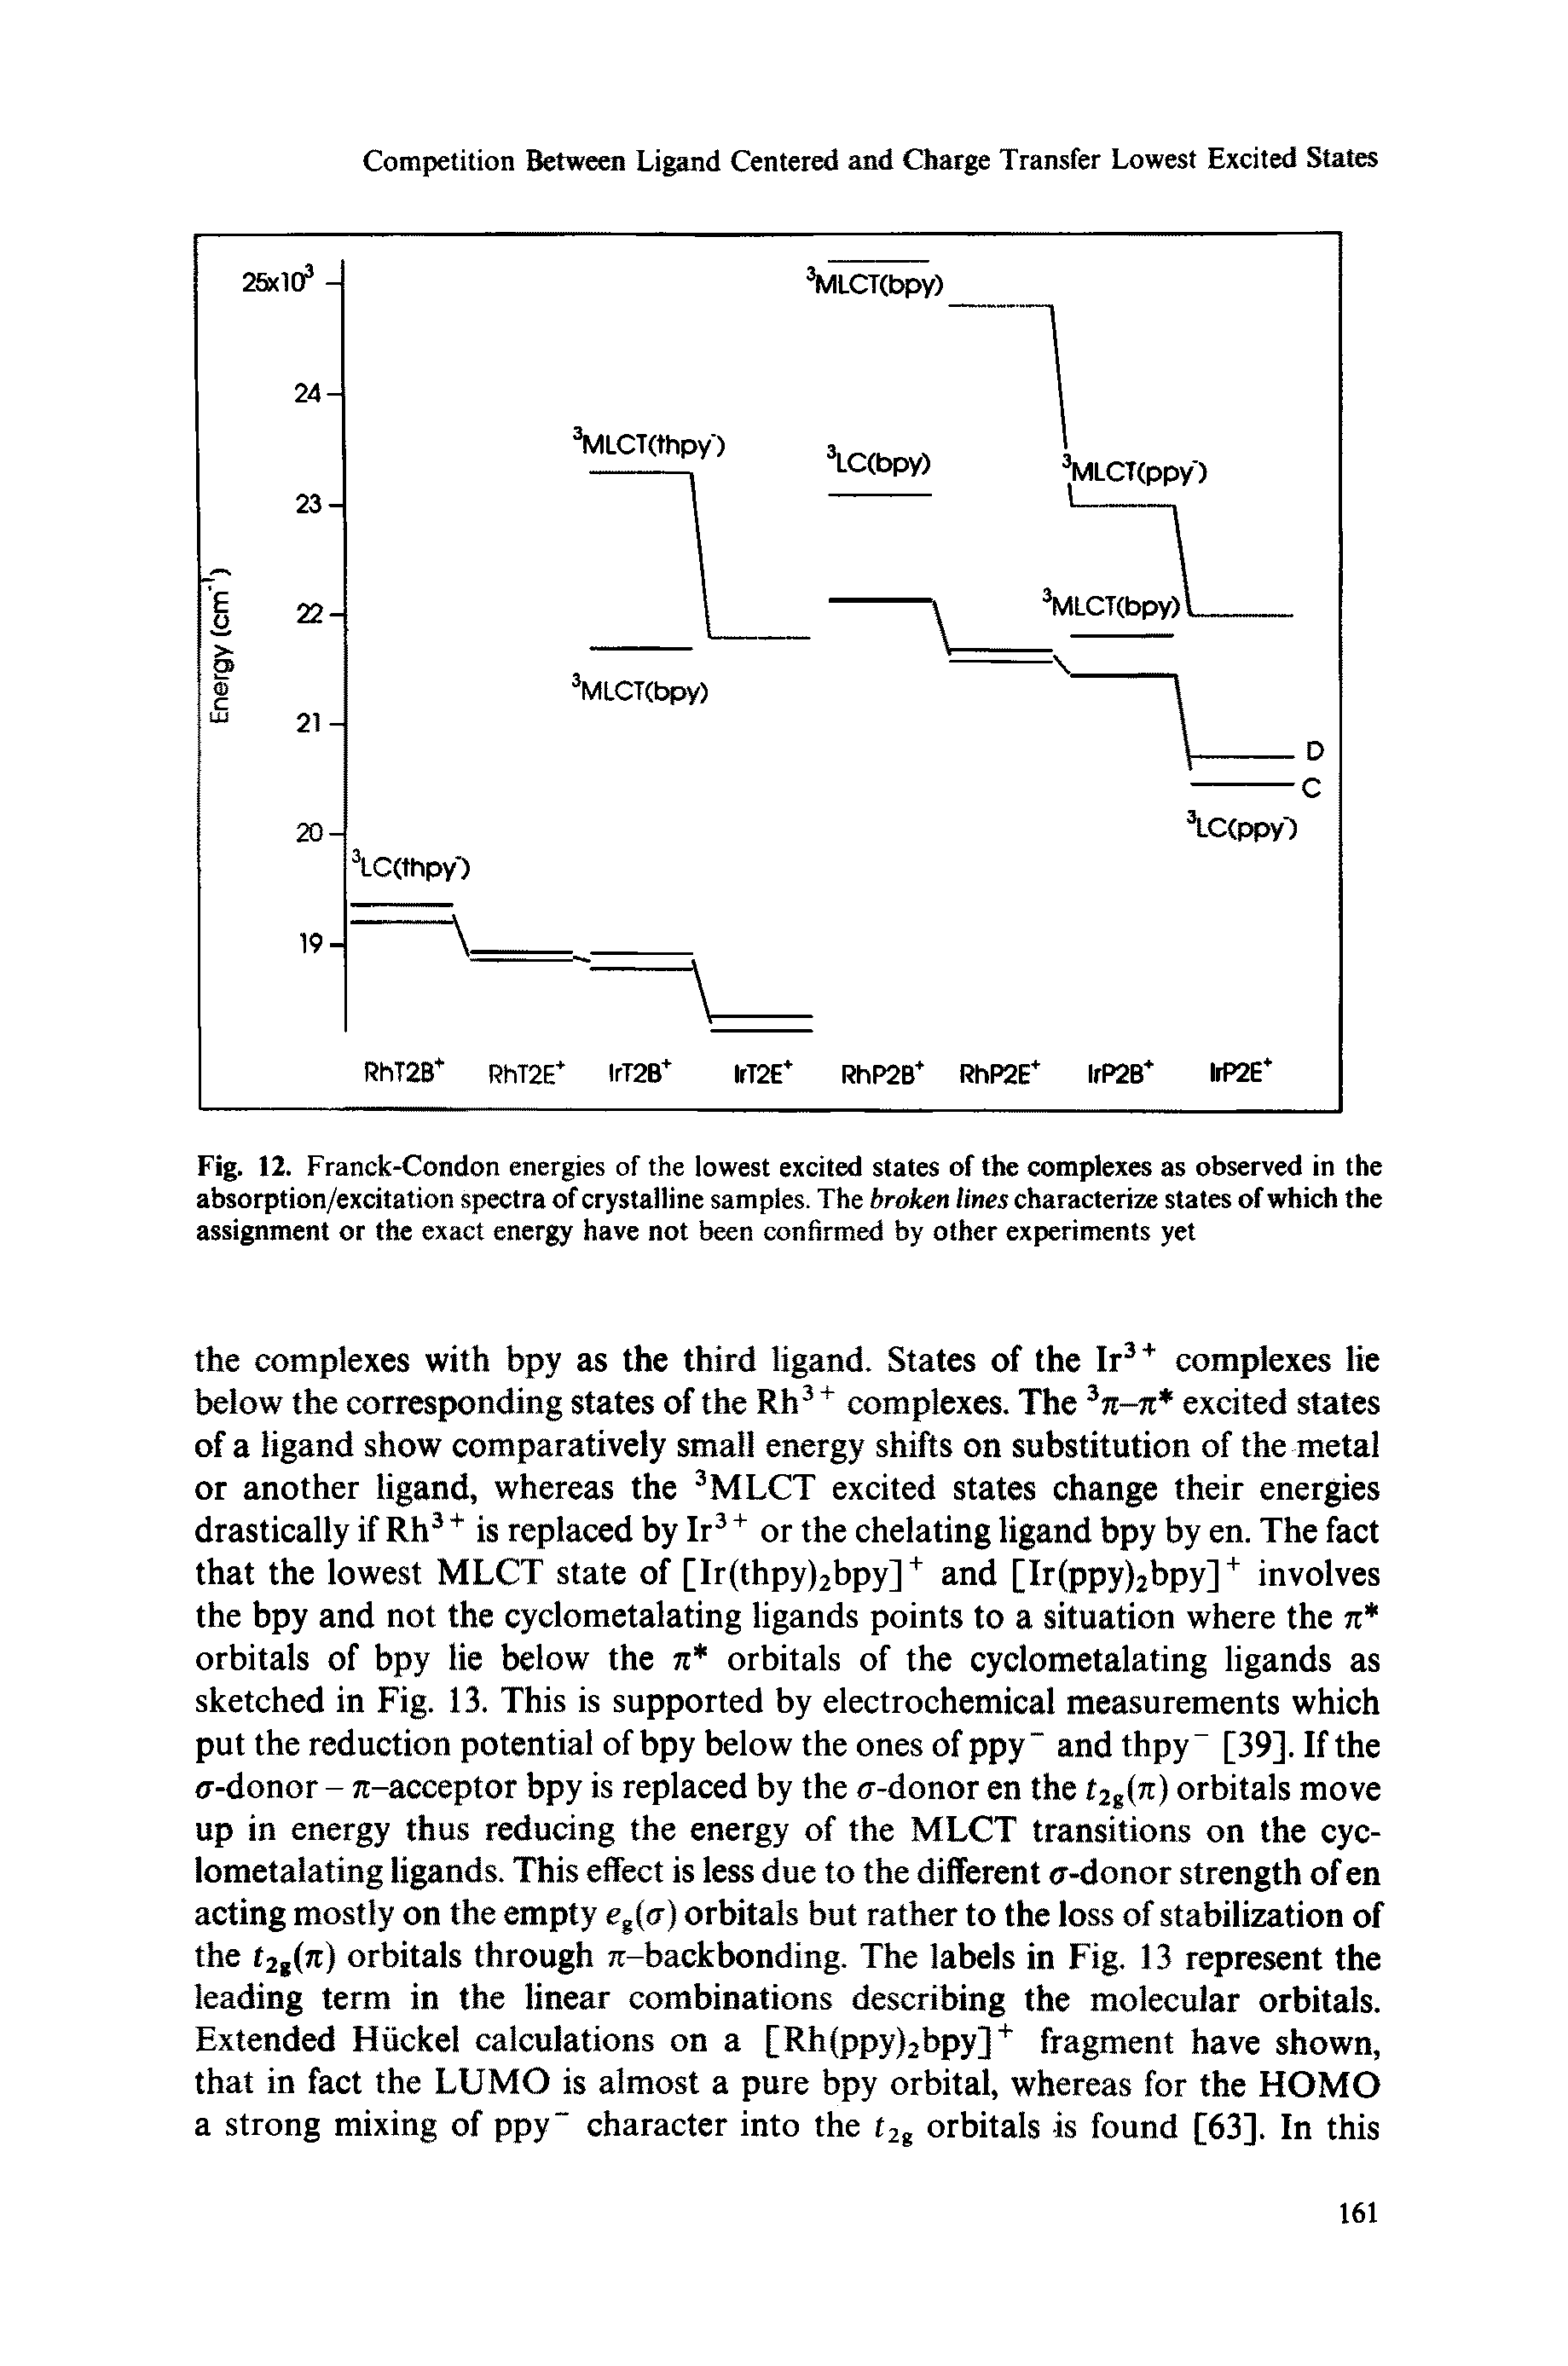 Fig. 12. Franck-Condon energies of the lowest excited states of the complexes as observed in the absorption/excitation spectra of crystalline samples. The broken lines characterize states of which the assignment or the exact energy have not been confirmed by other experiments yet...